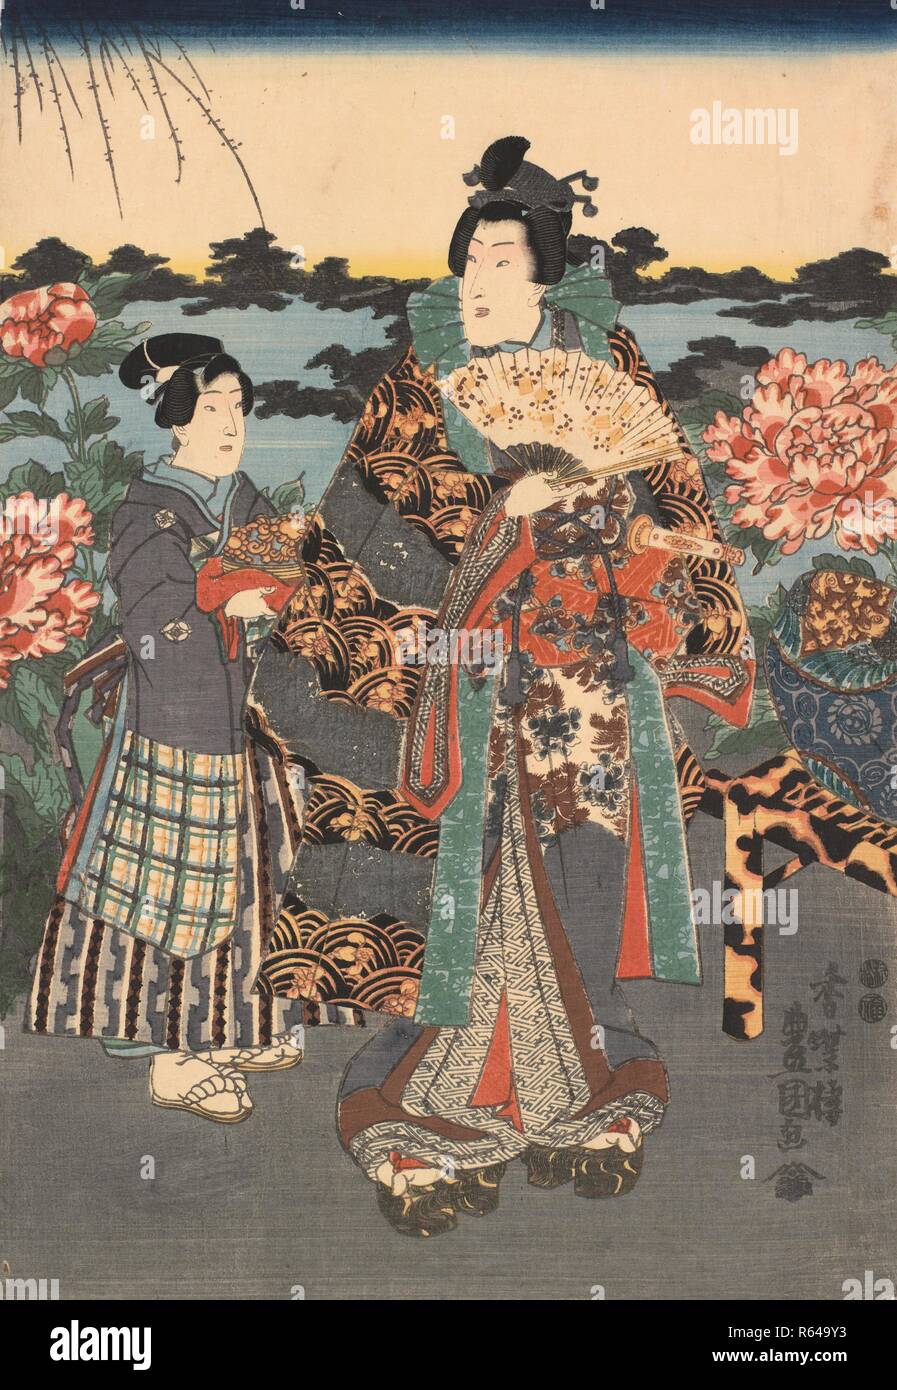 Rustic Genji and Boy Attendant, middle sheet of the triptych Admiring the Peony Garden. Date: 1849-1851. Dimensions: 38 cm x 26 cm. Museum: Van Gogh Museum, Amsterdam. Author: KUNISADA, UTAGAWA. Stock Photo